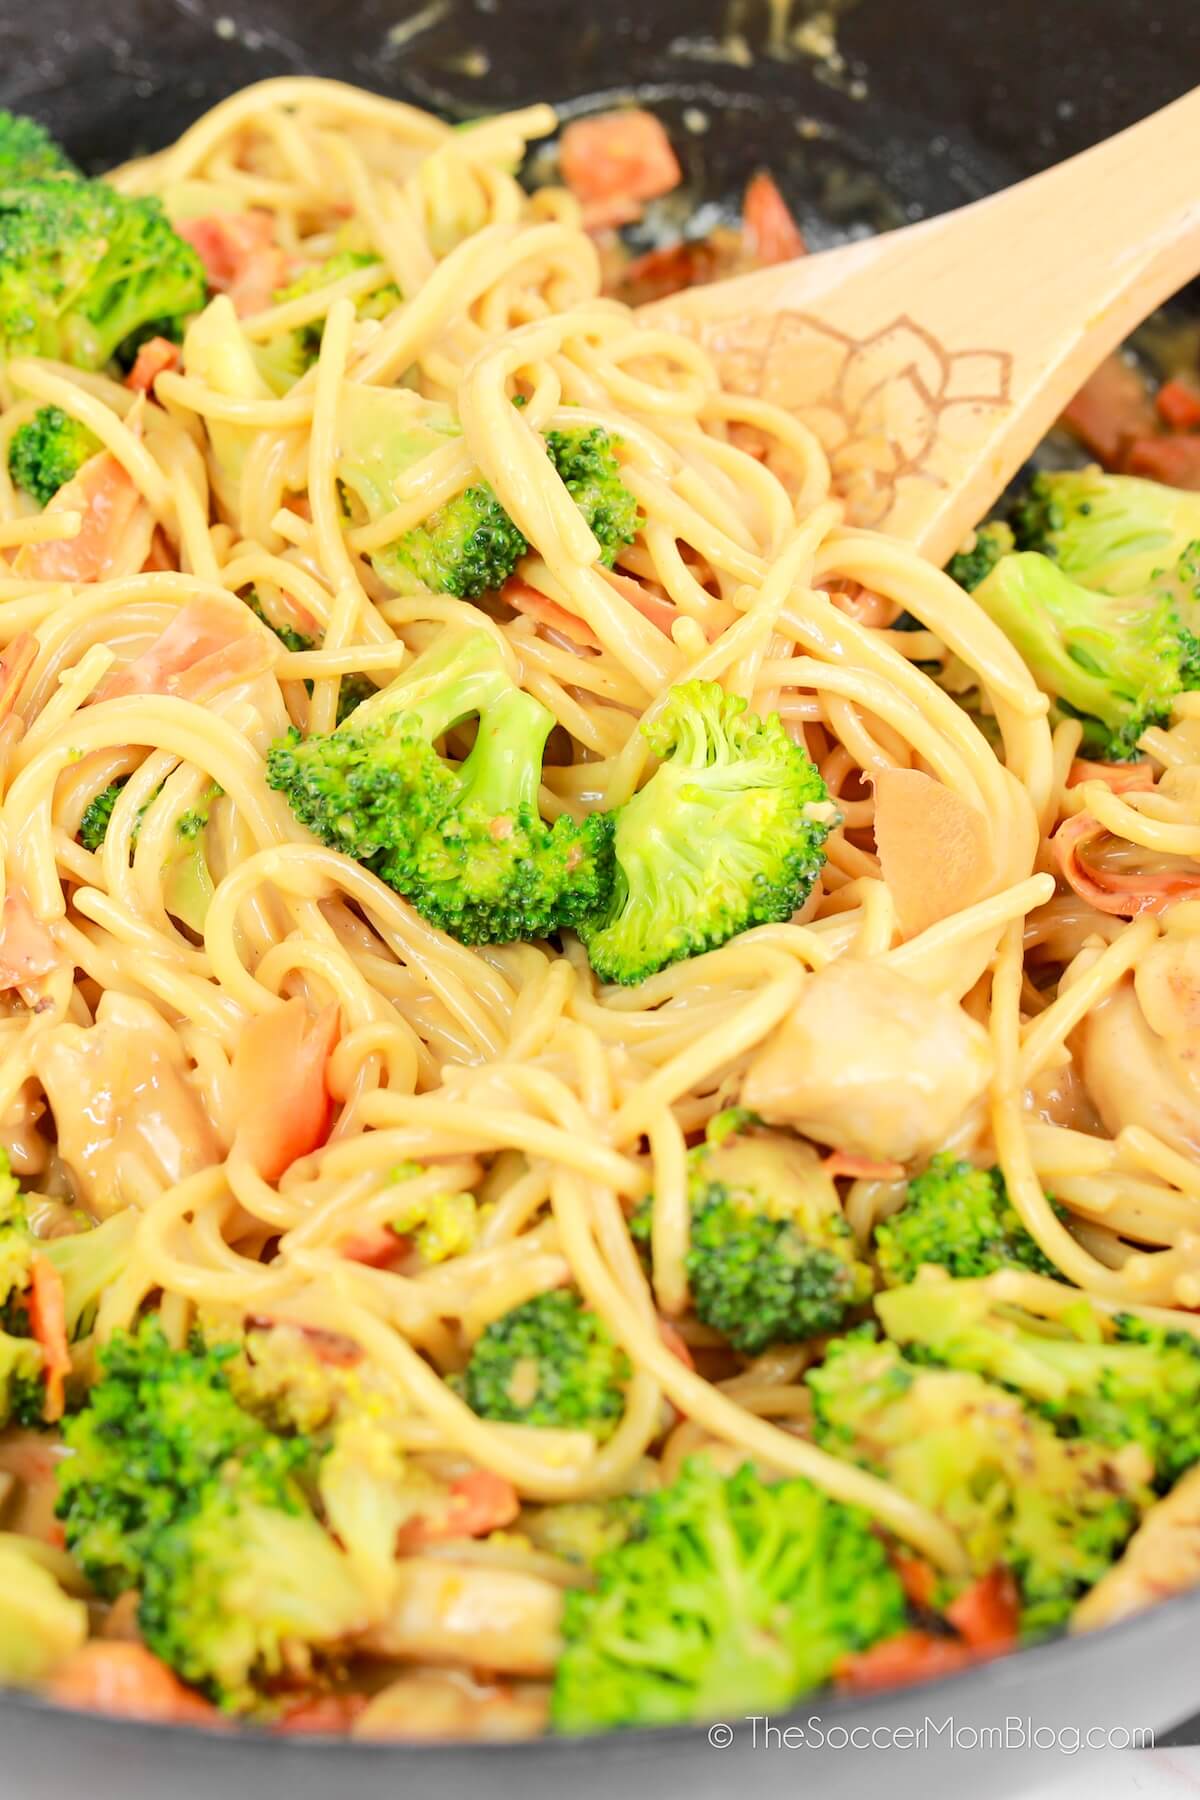 skillet with noodles and broccoli in peanut sauce